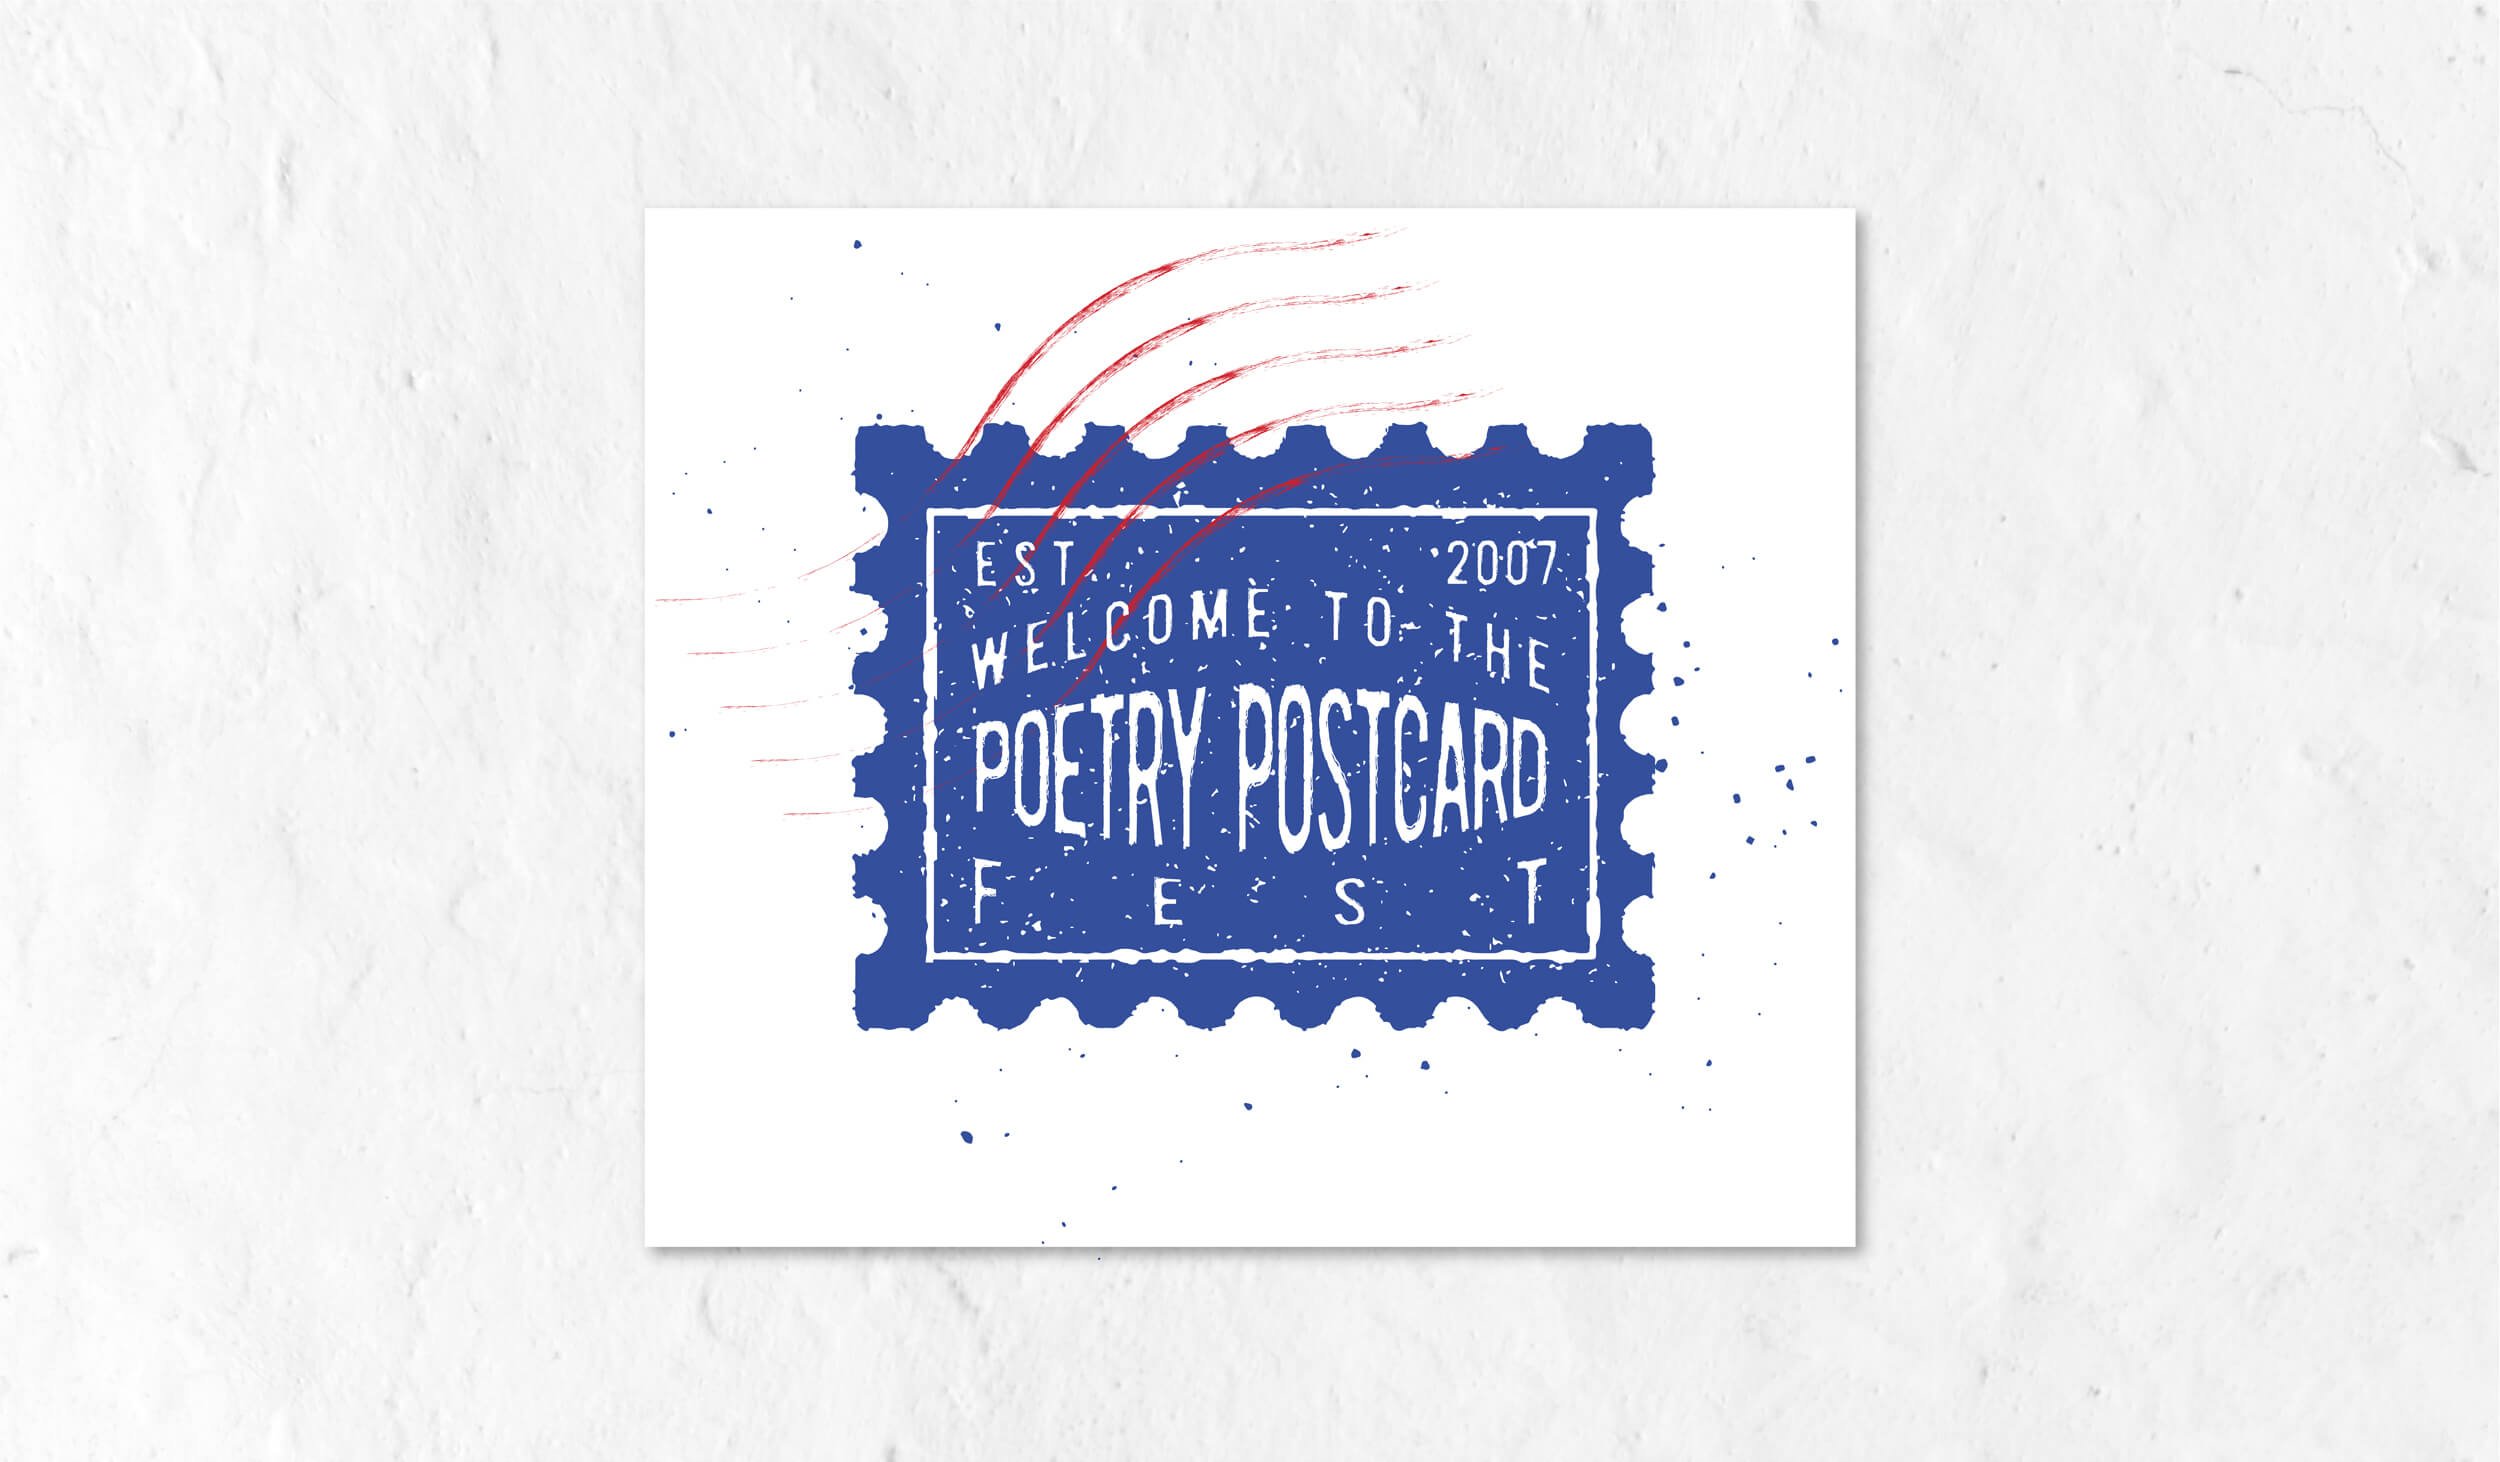 PPF_logos_stamp_welcome.jpg